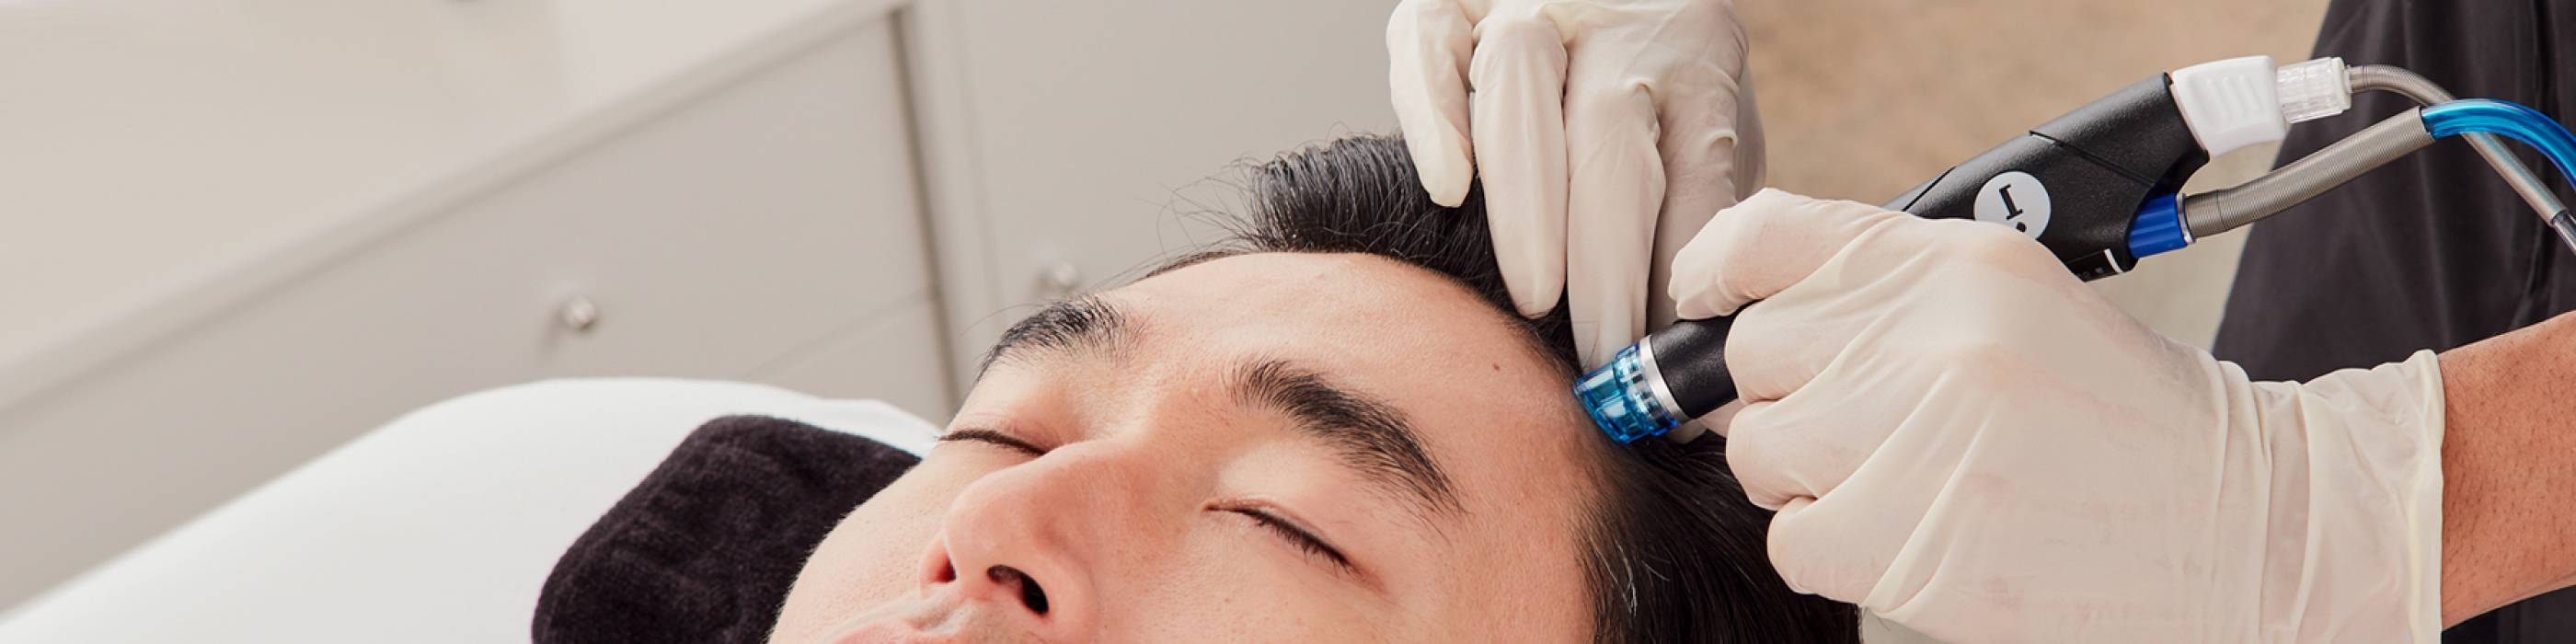 Close-up of relaxed man with eyes closed undergoing HydraFacial Keravive treatment for hair loss to help regrow thicker hair.